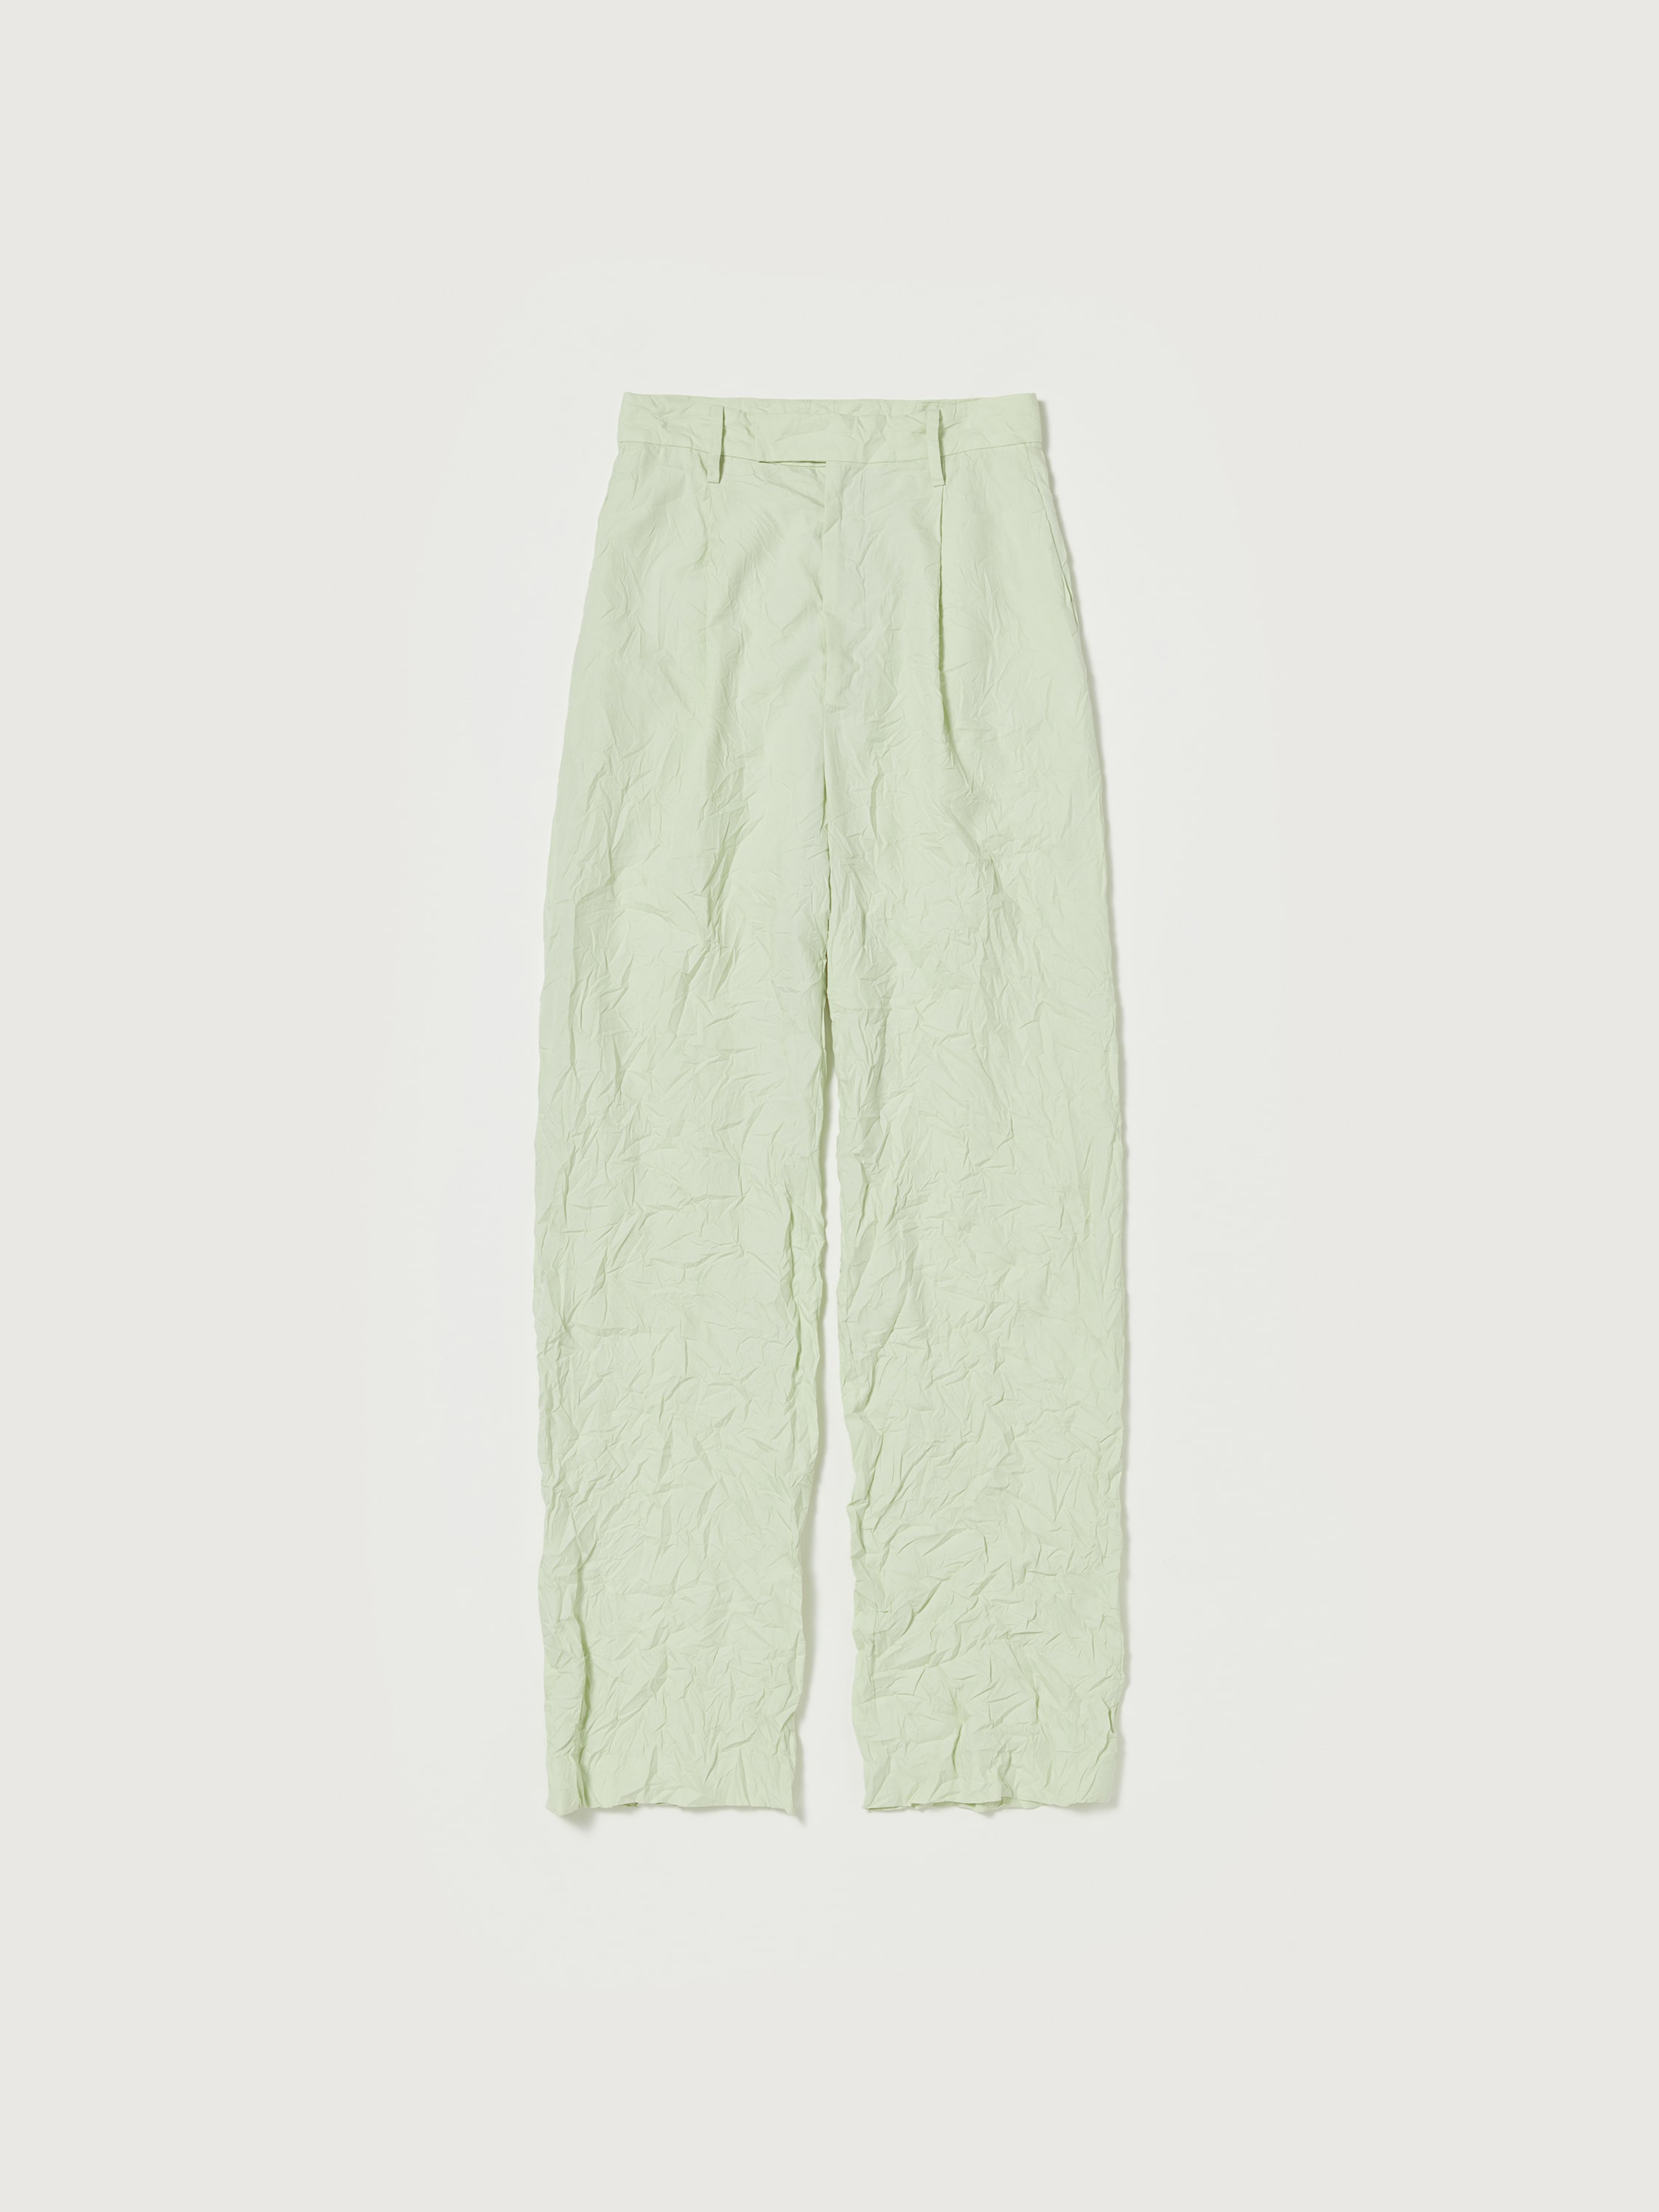 WRINKLED WASHED FINX TWILL PANTS 詳細画像 LIGHT GREEN 1